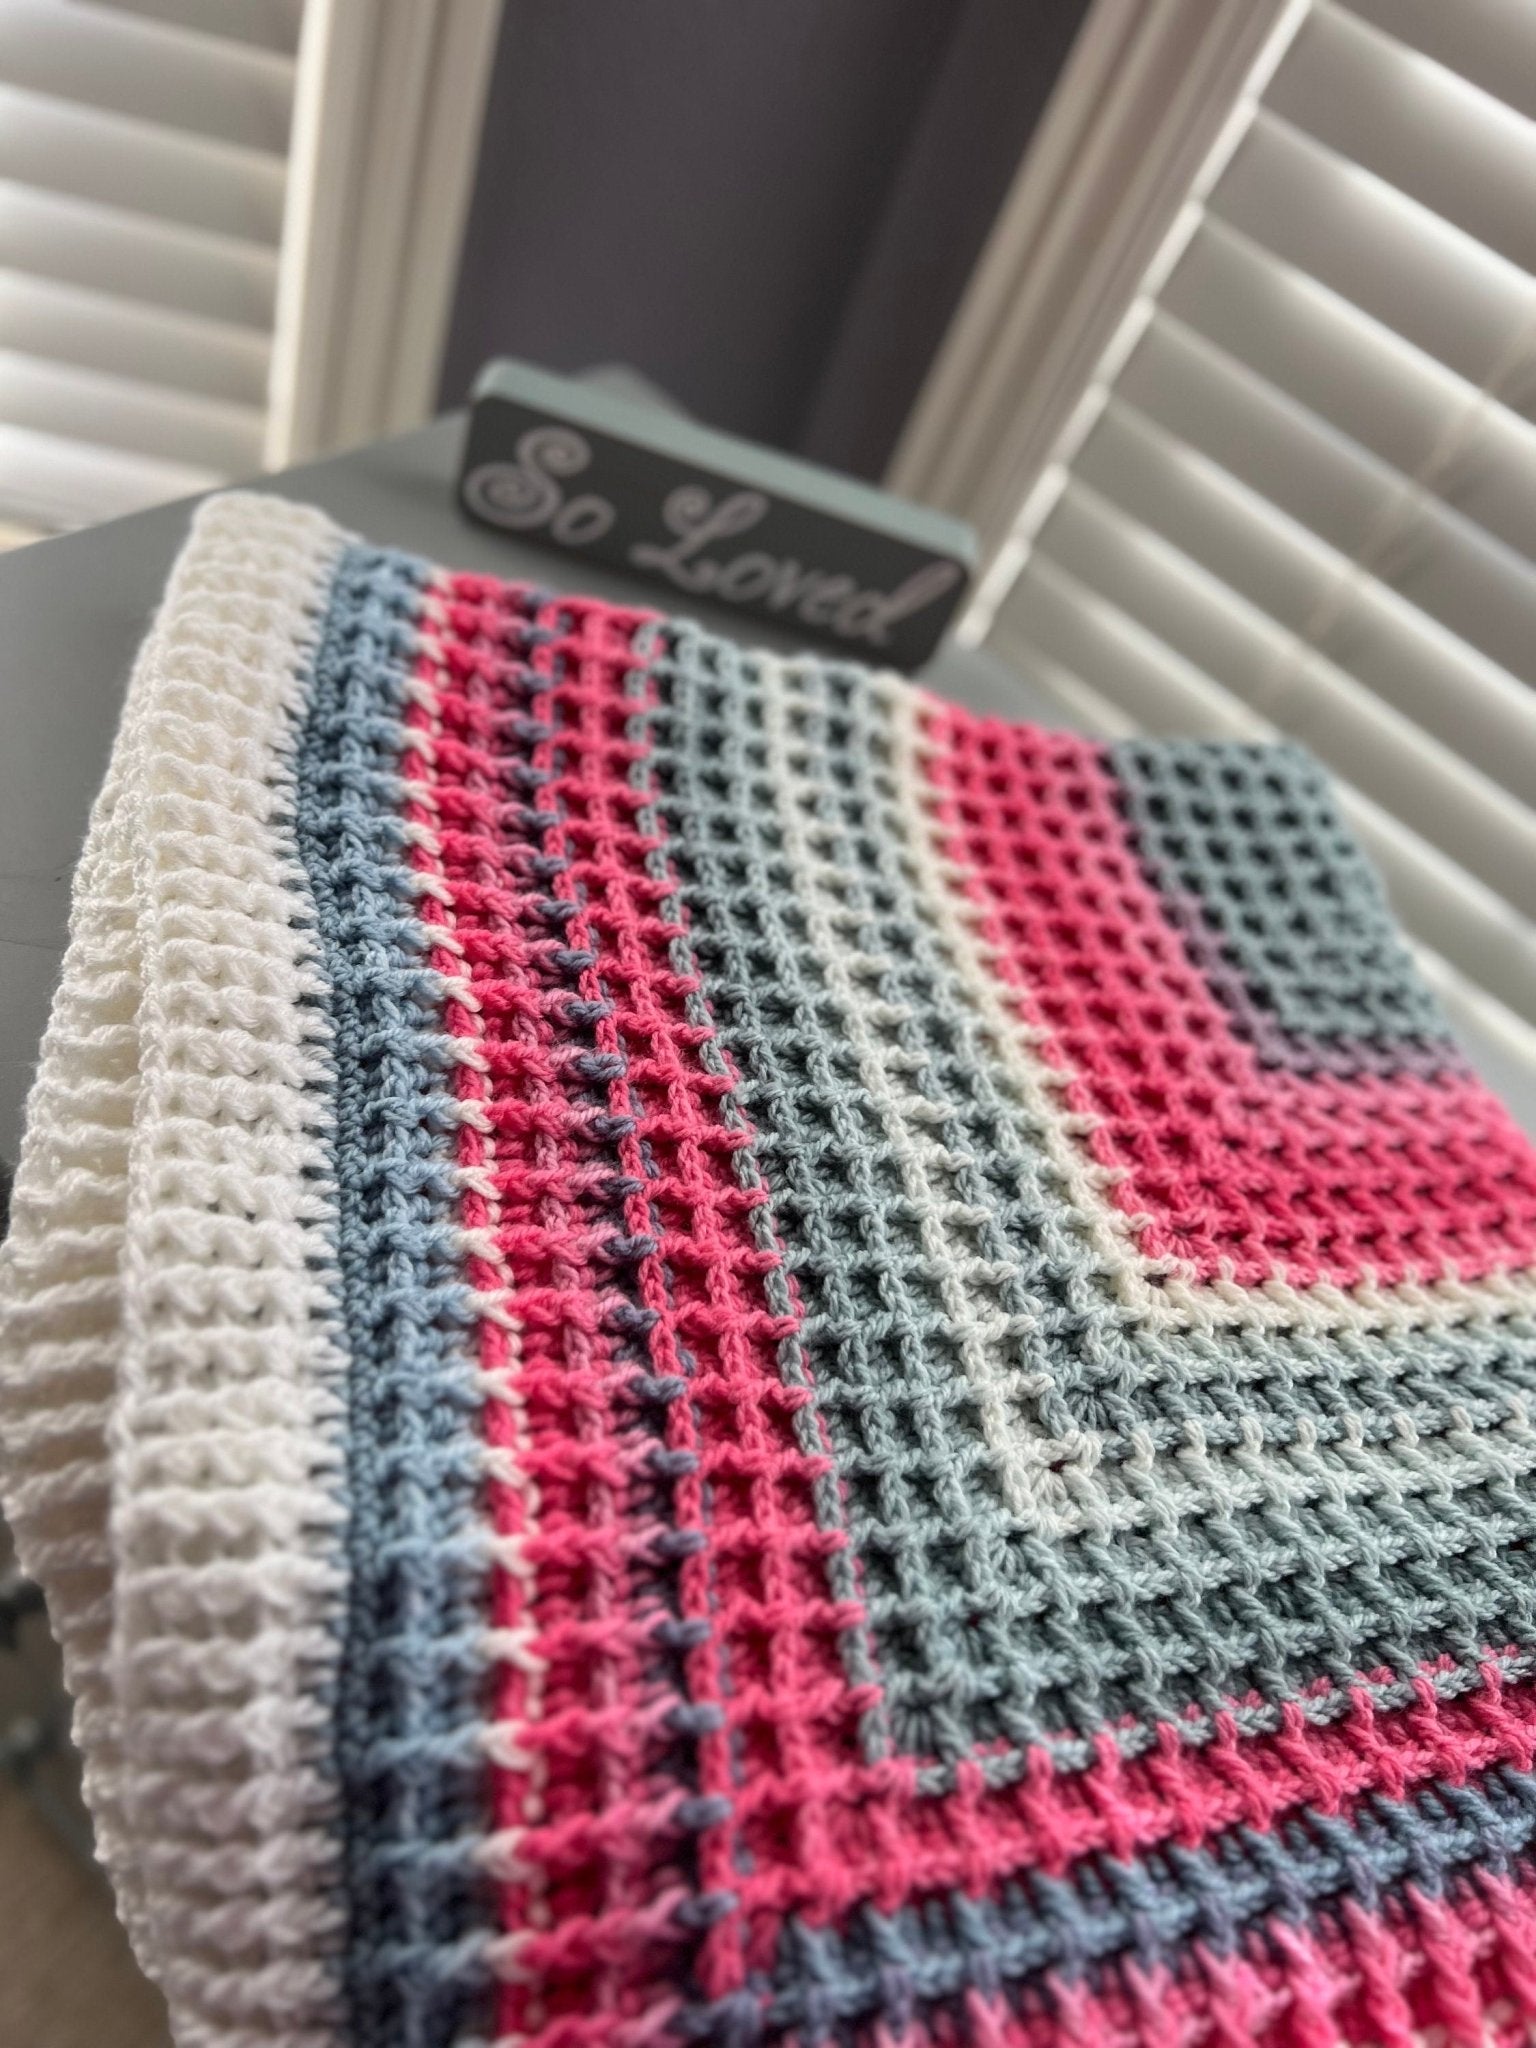 Baby blanket- 36”x36” handmade crochet waffle stitch - pink, white, and gray colors, baby shower gift, handmade heirloom baby blanket - Lilly Grace Sparkle Boutique